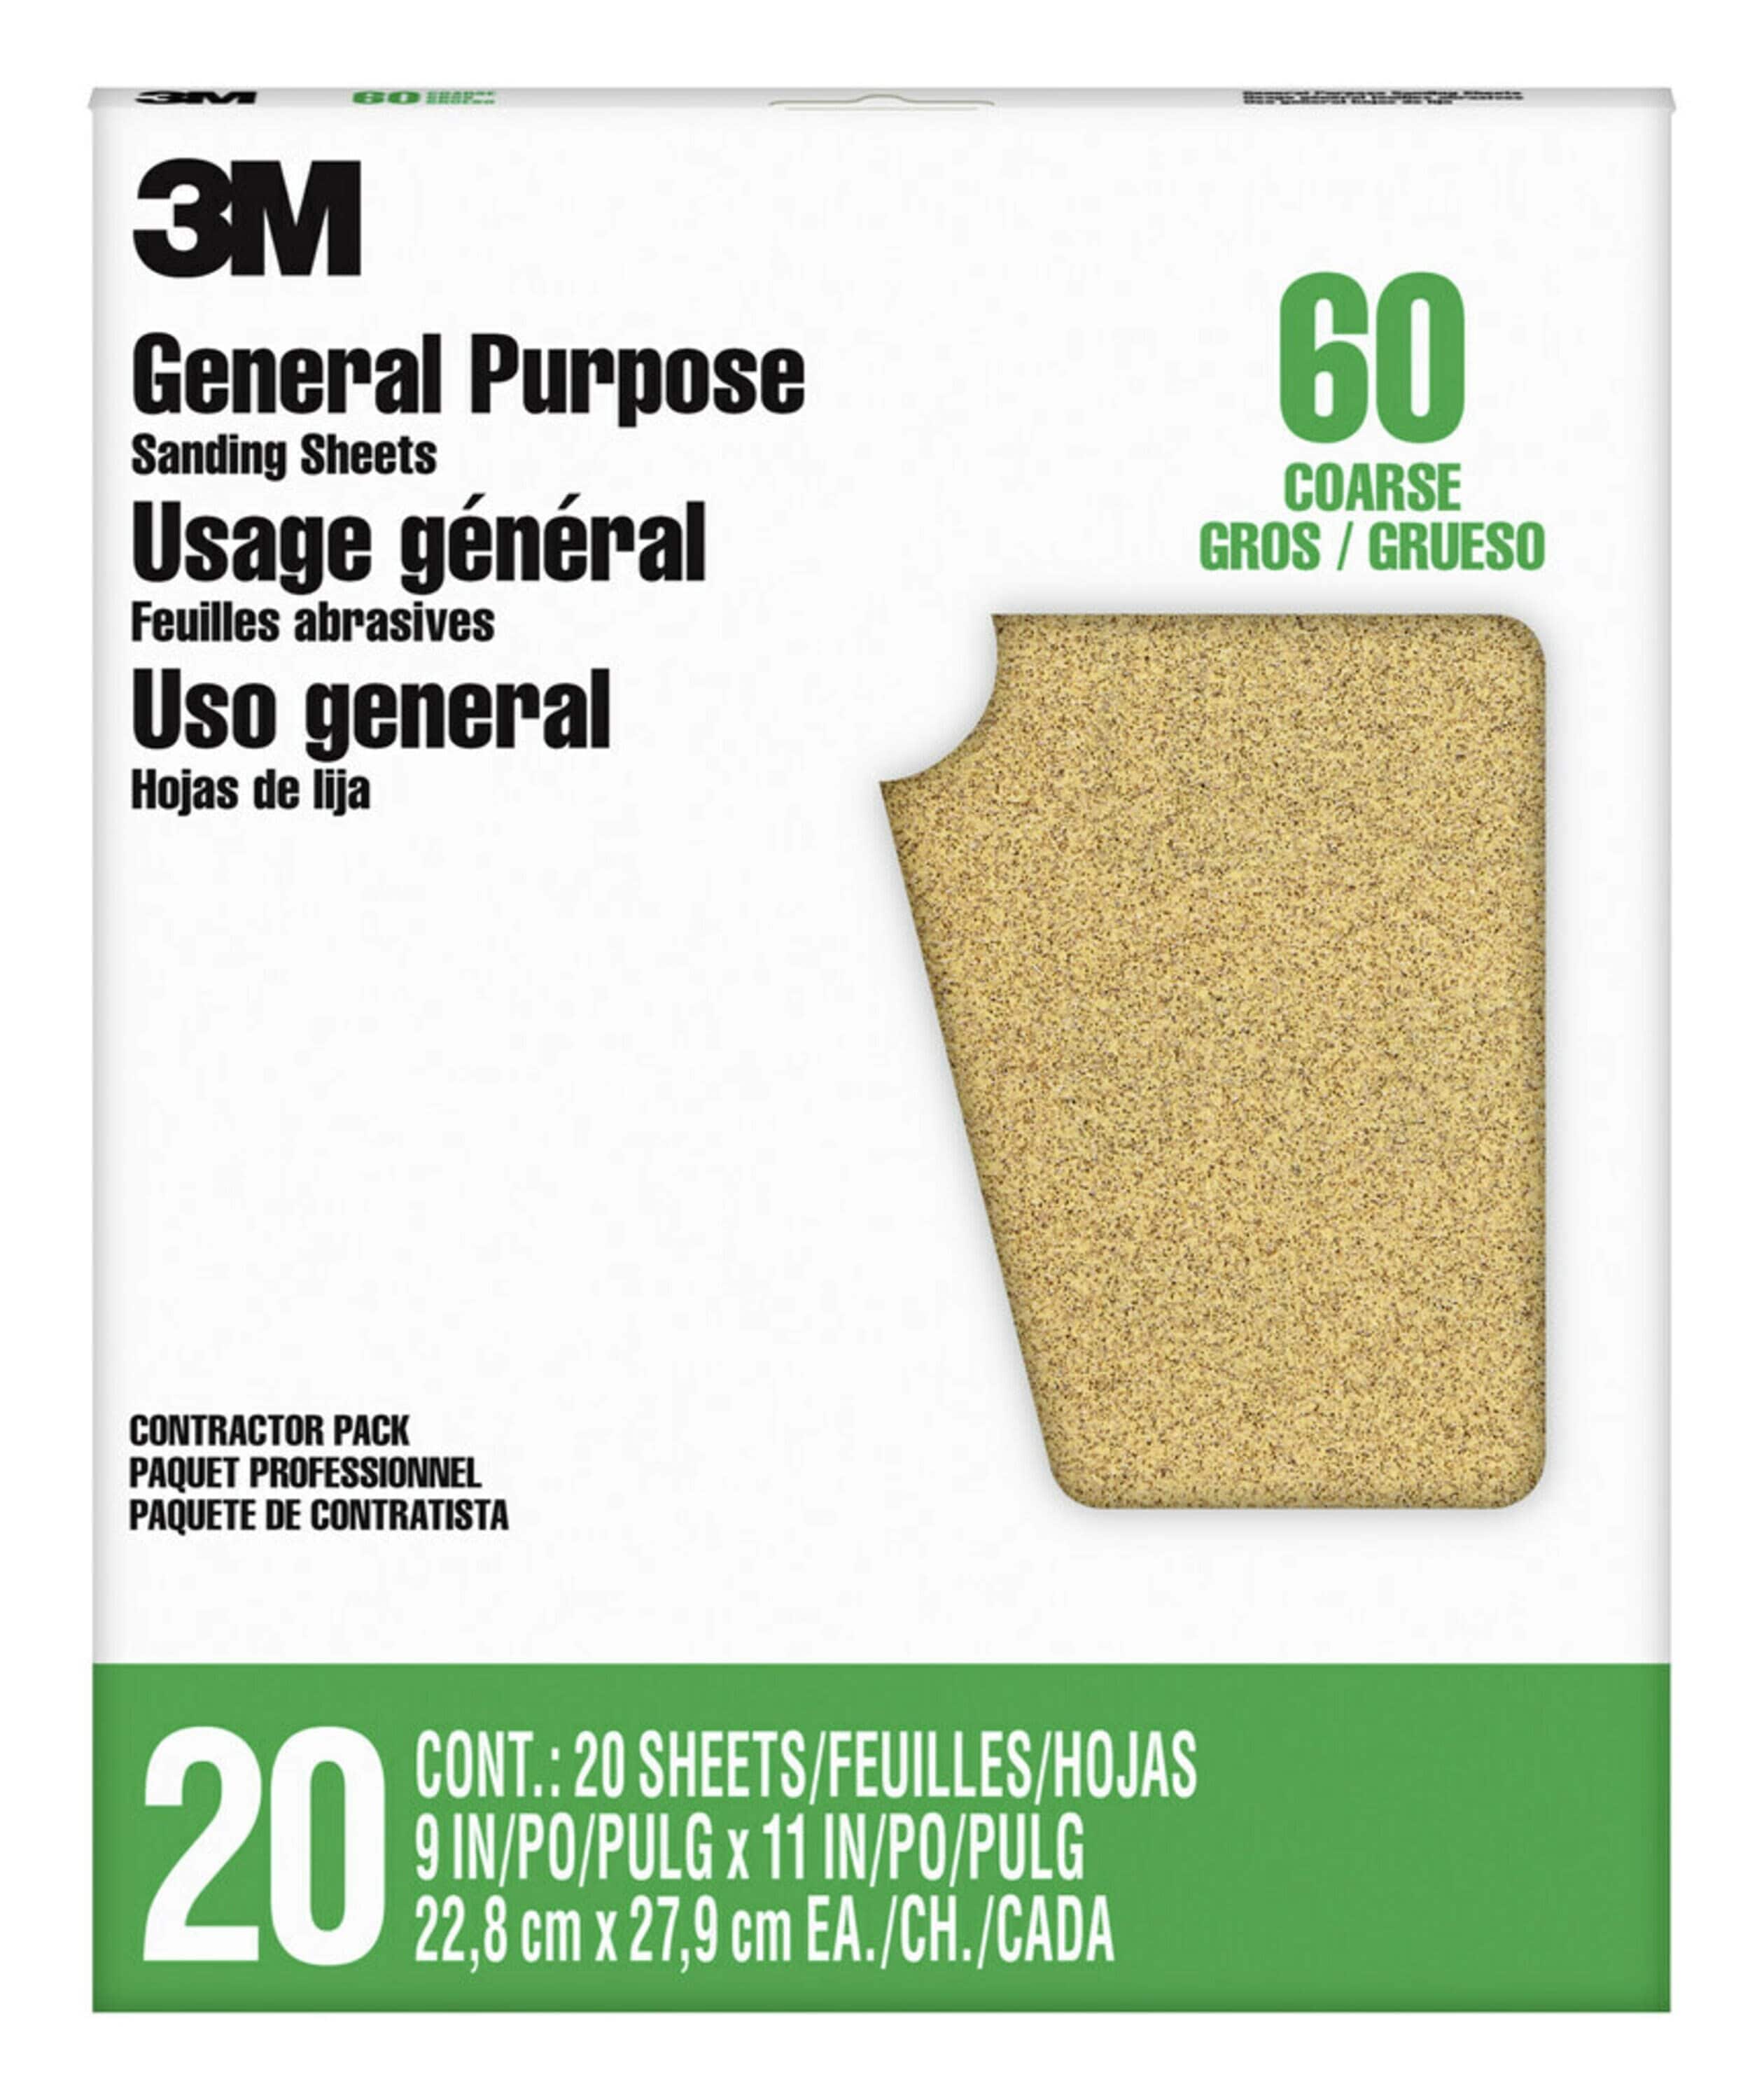 Corrugated Cardboard Filler Insert Sheet Pads 1/8 - 16 x 16 Inches - 10  Pack